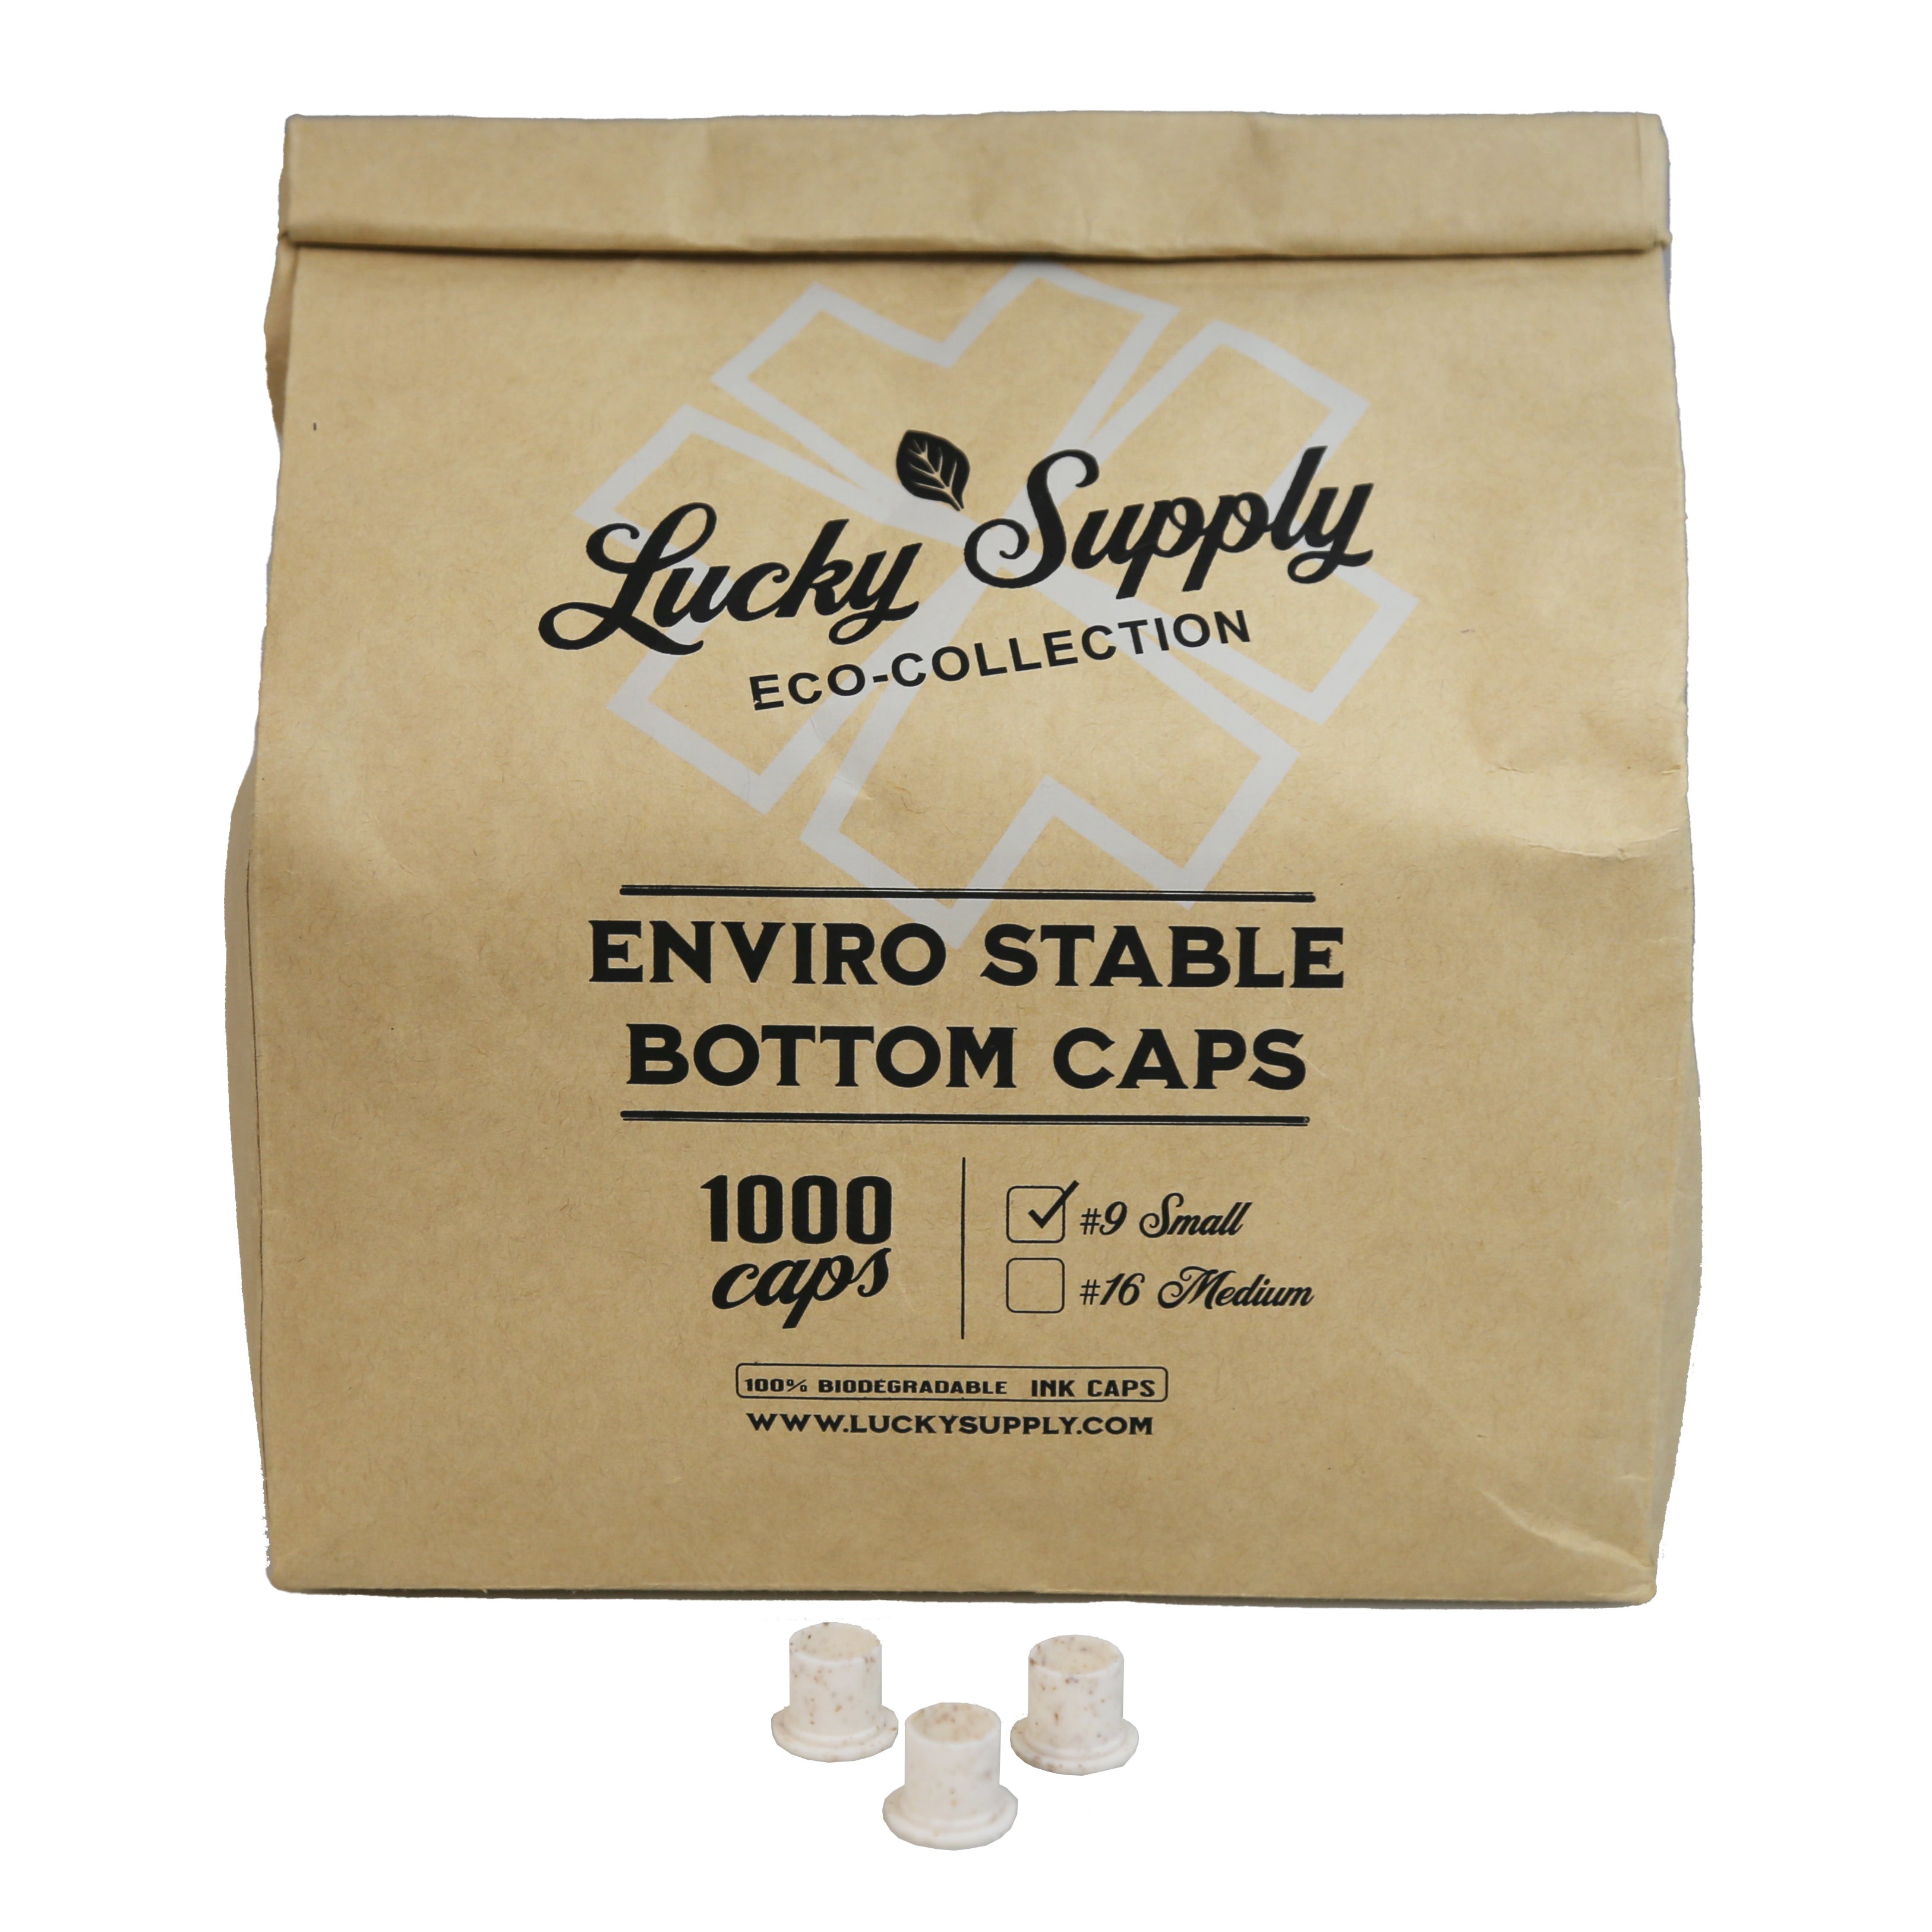 Enviro Stable Bottom Caps - Biodegradable Ink Caps by Lucky Supply